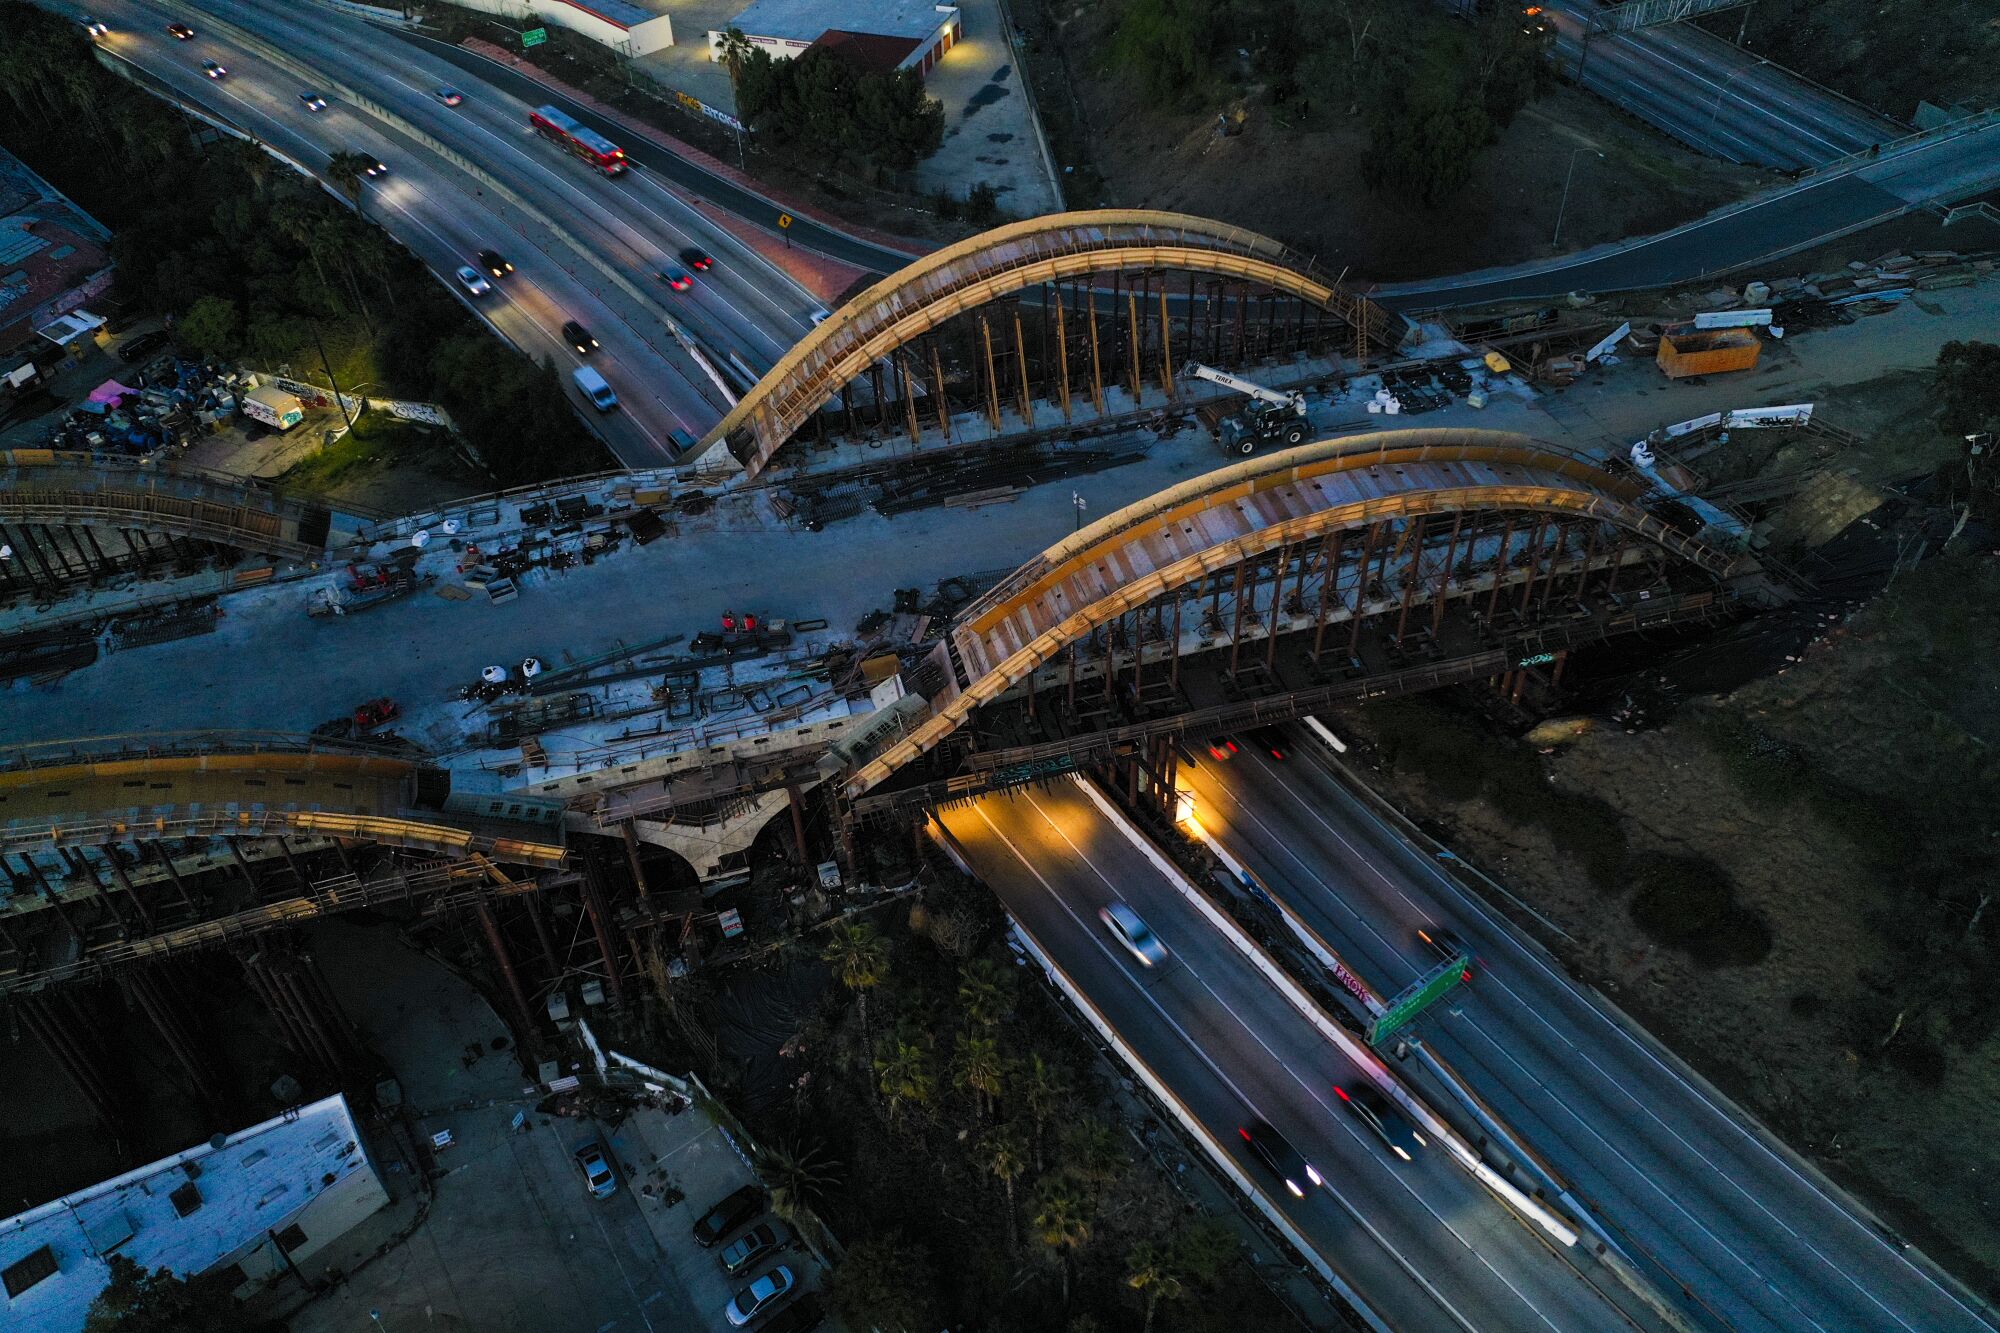 An aerial view of a new section of the bridge